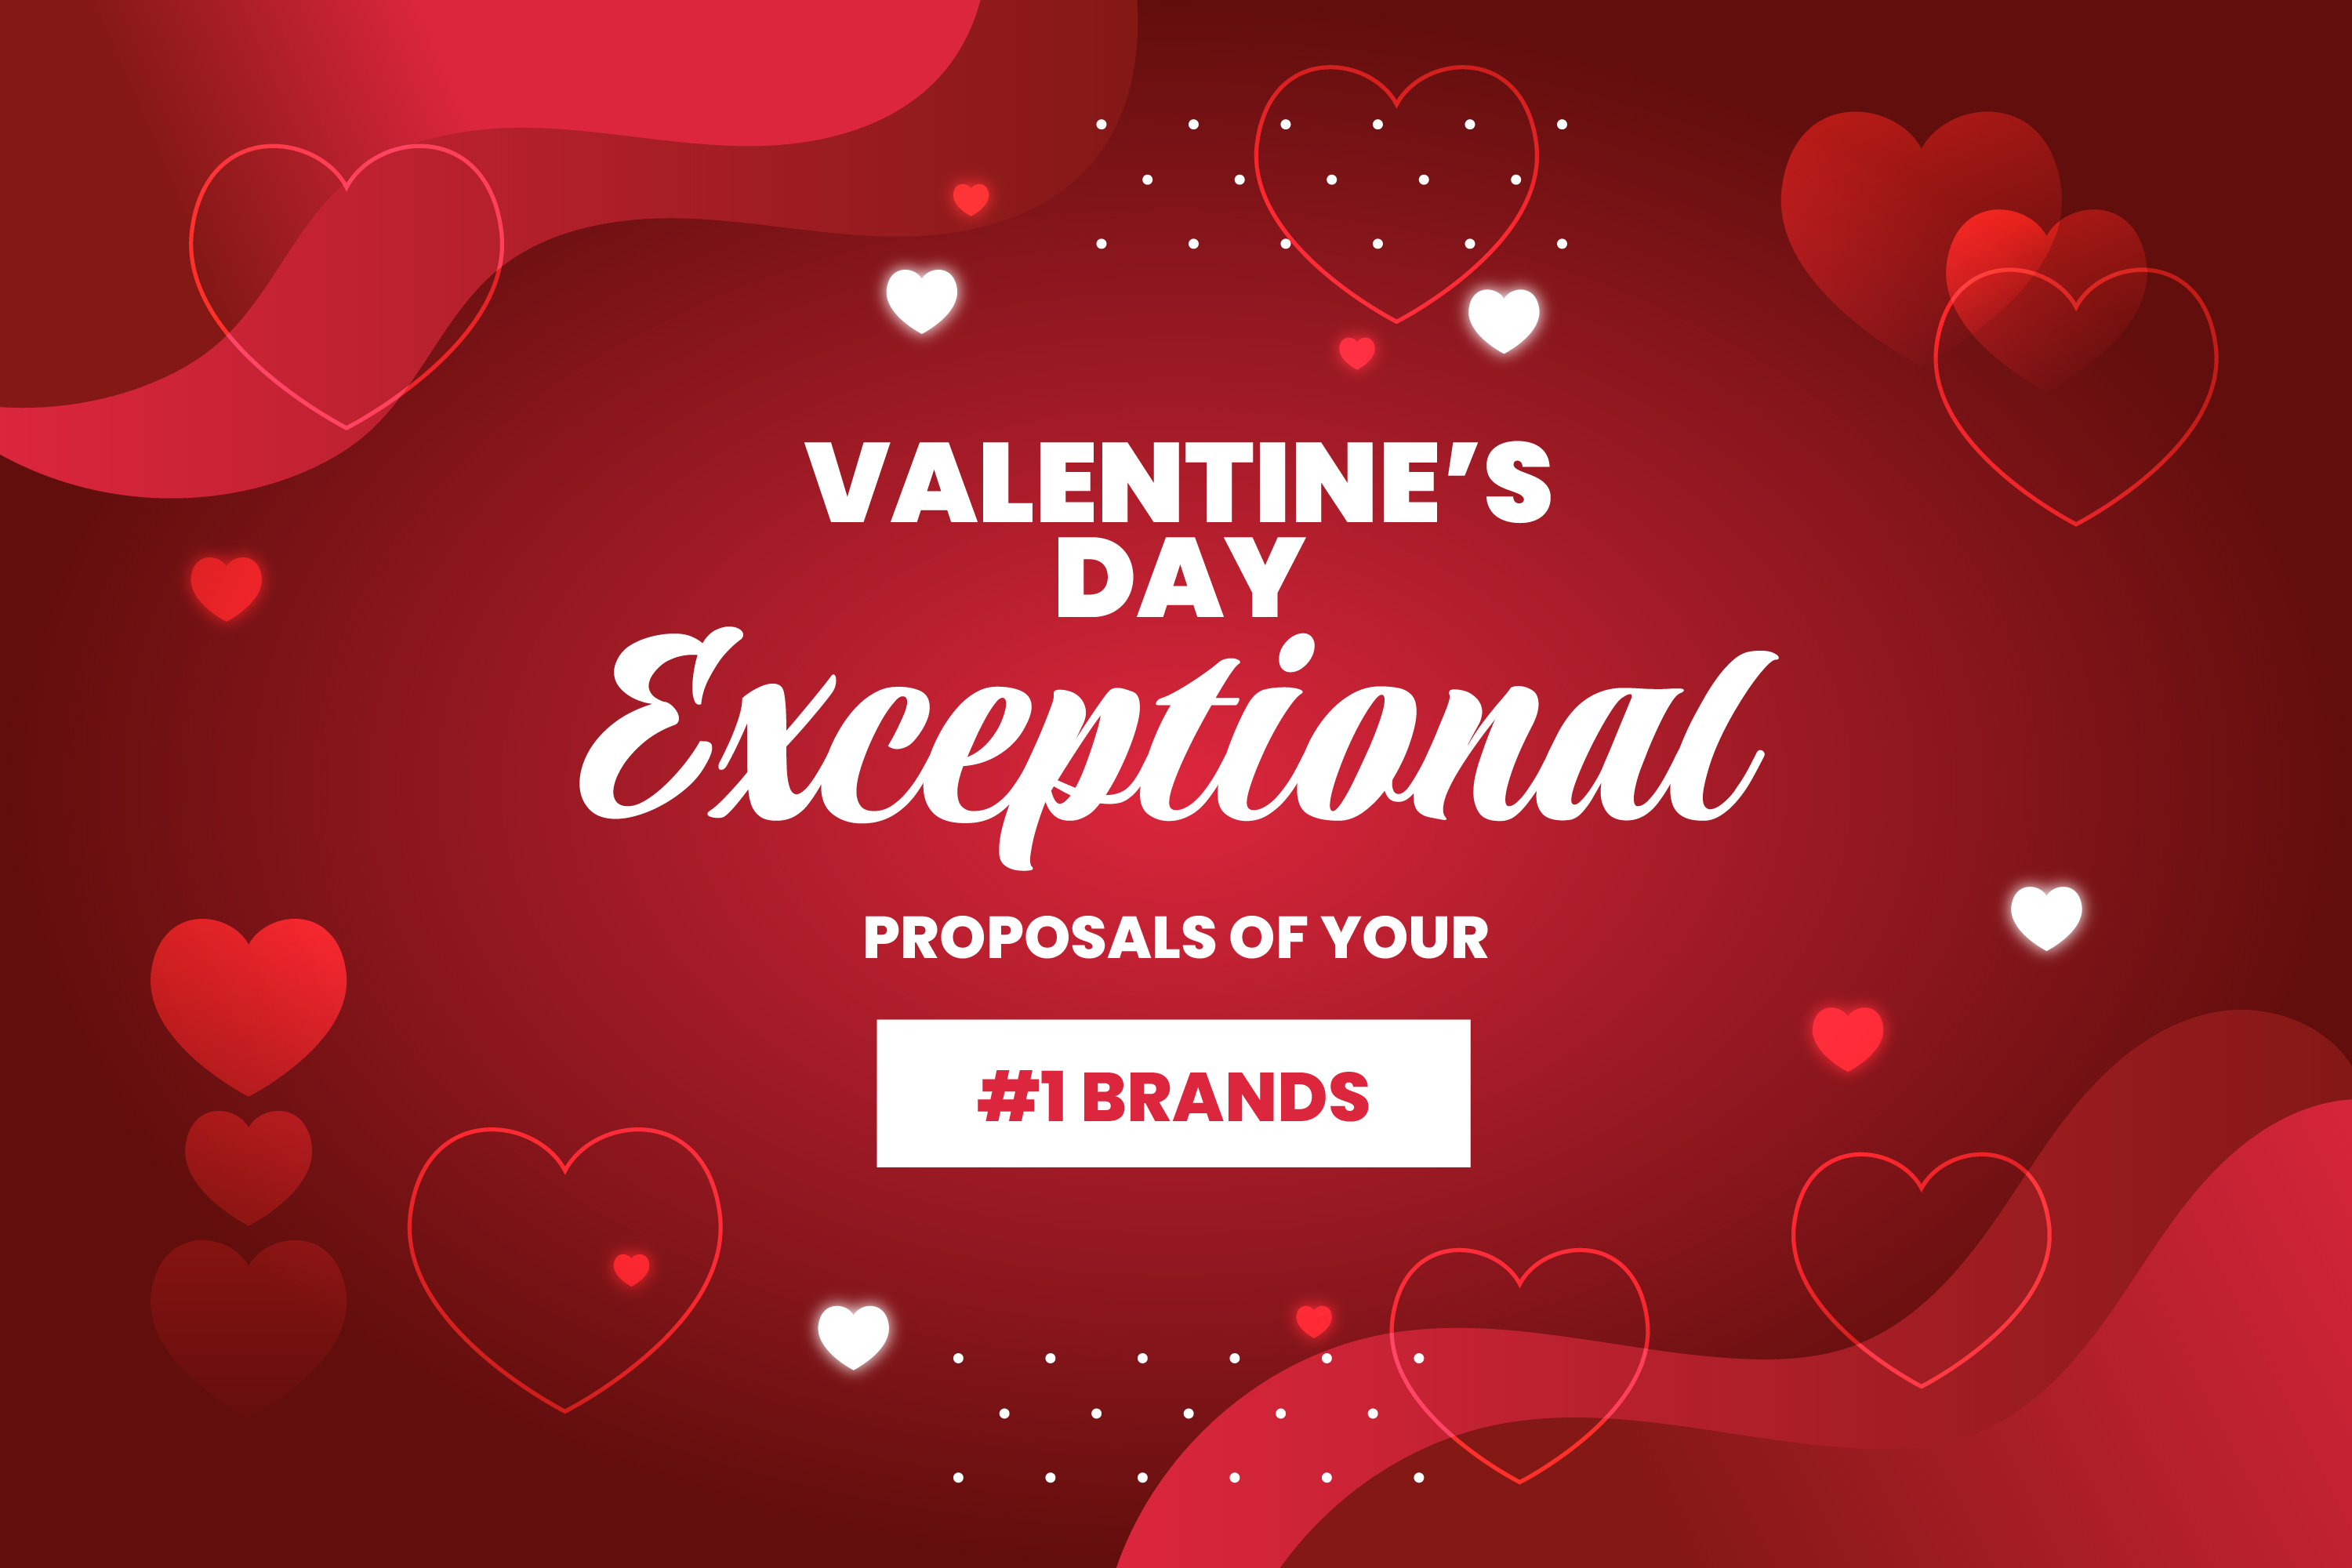 Valentine's Day Exceptional Proposals of your #1 Brands